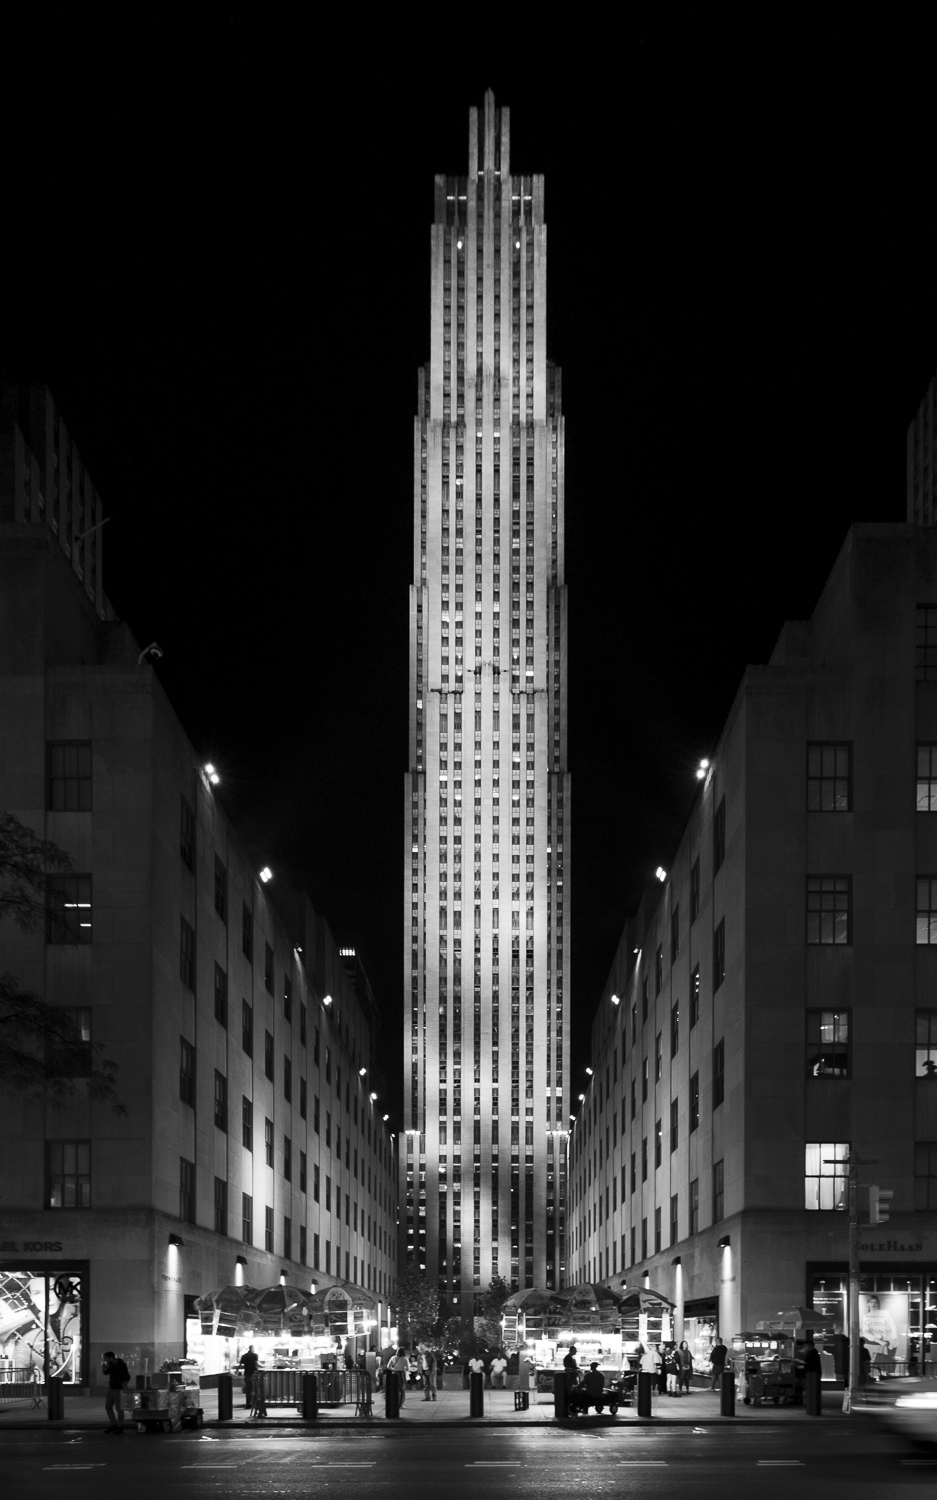 A black and white photograph of one face of a tall, narrow skyscraper at night. The tower has several small setbacks and is brilliantly illuminated, standing in contrast to the black night sky. The view of the tower is from a perpendicular main rod, looking down a broad, landscaped alley flanked by low, partly lit buildings. People hurry past storefronts on the sidewalk.